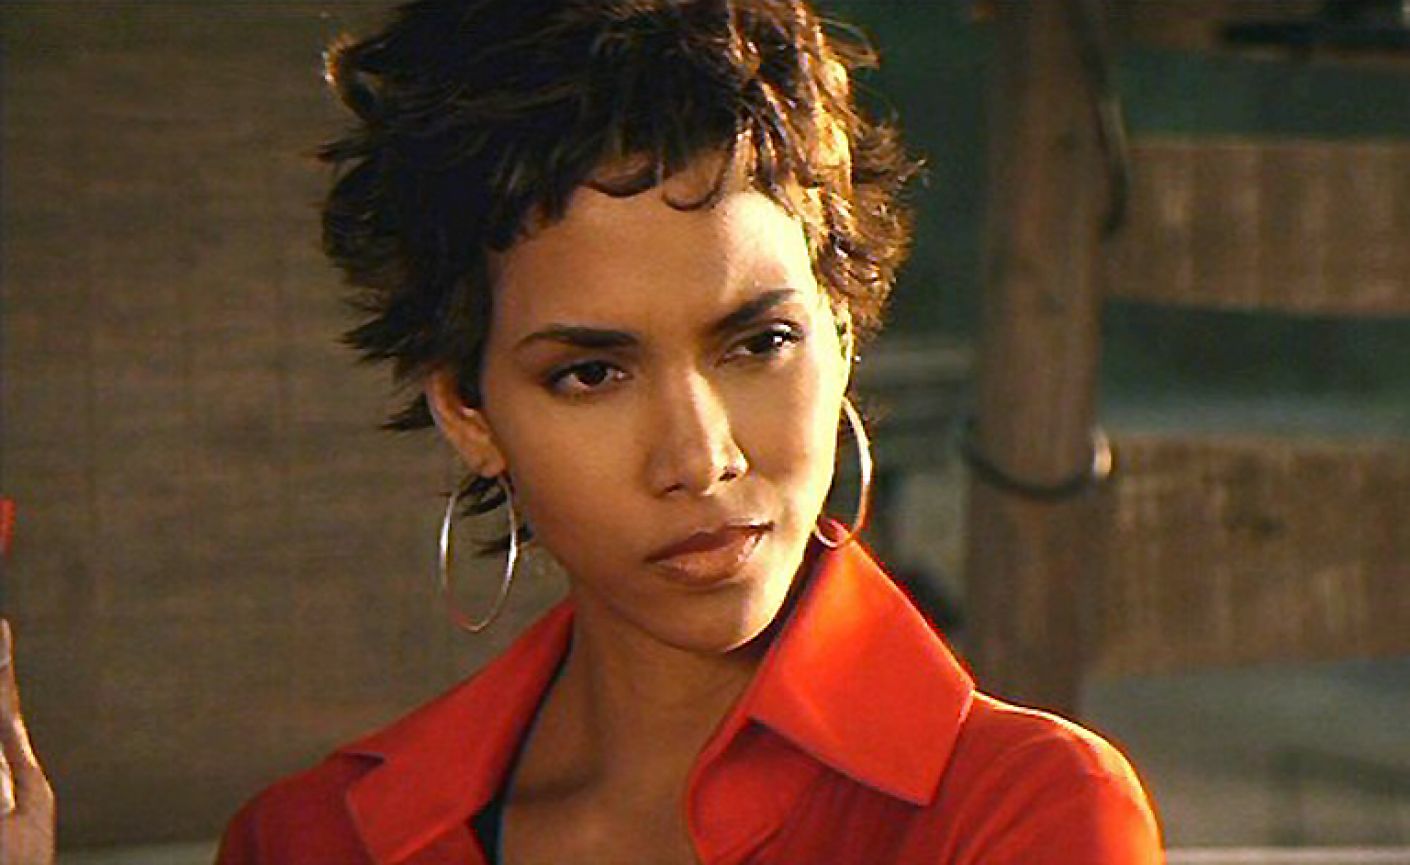 Movie halle nude berry These Halle